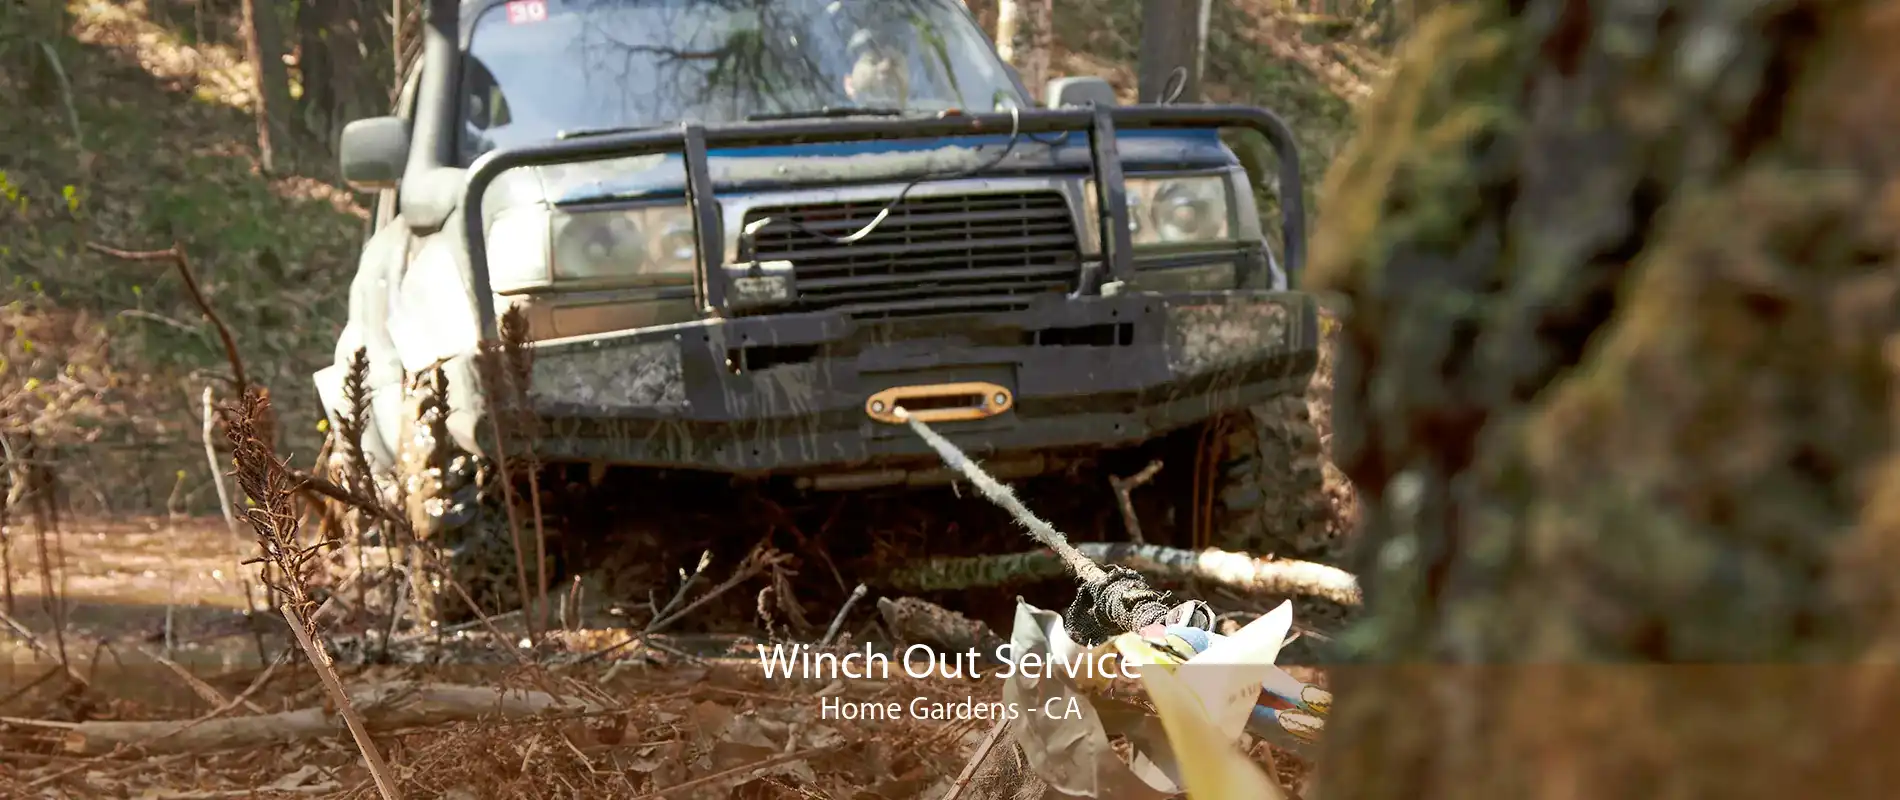 Winch Out Service Home Gardens - CA